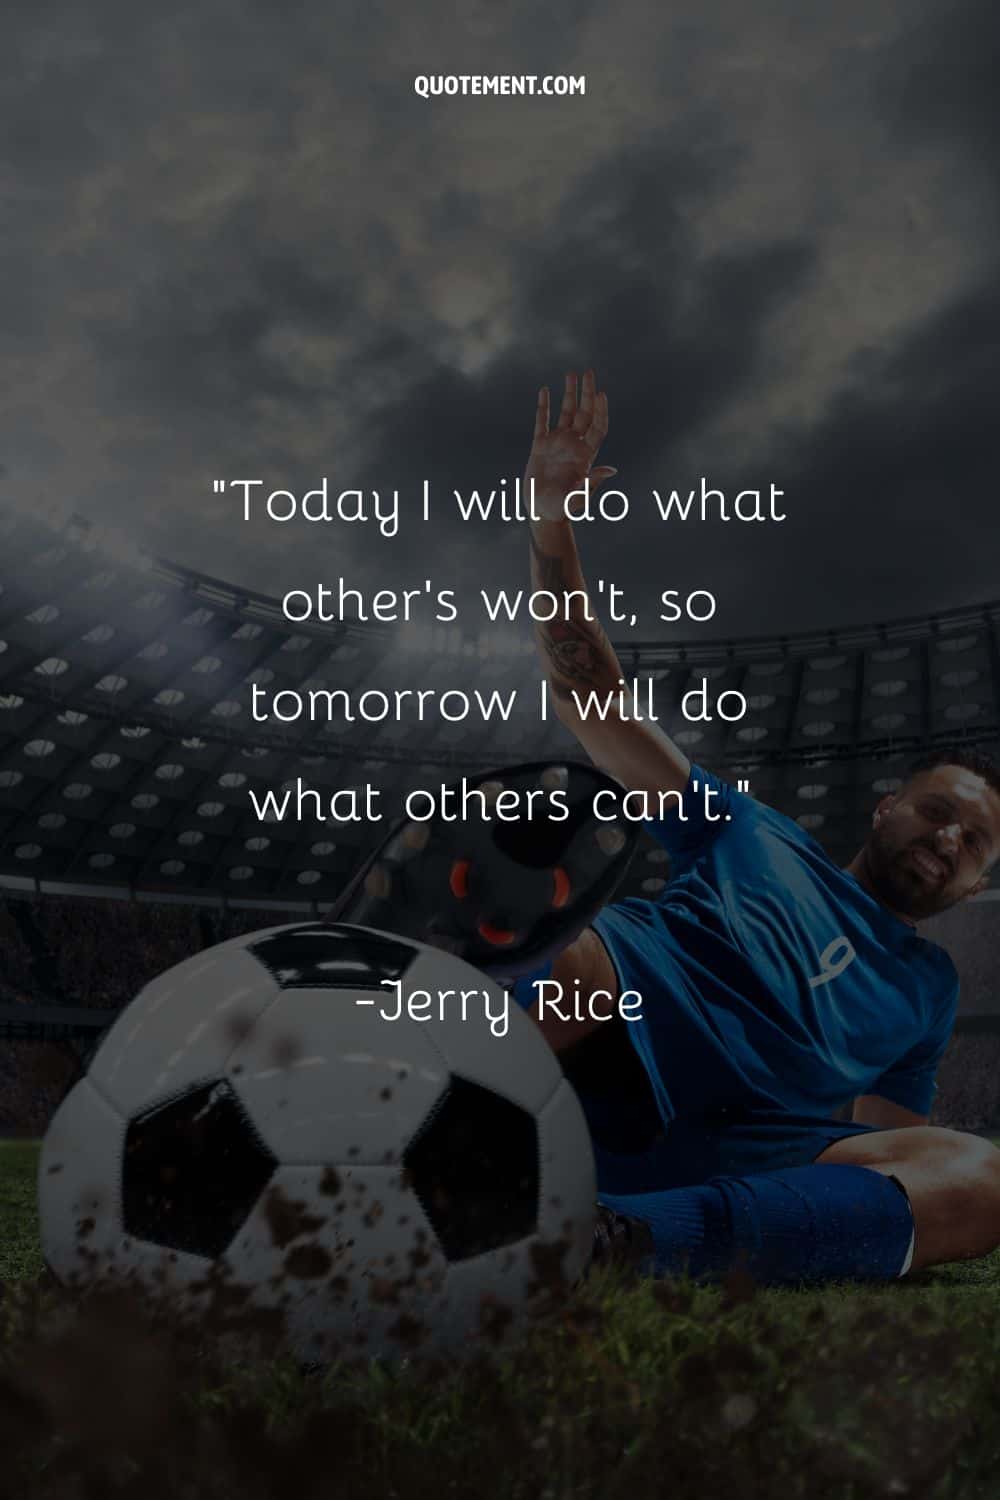 “Today I will do what other's won't, so tomorrow I will do what others can't.” ― Jerry Rice